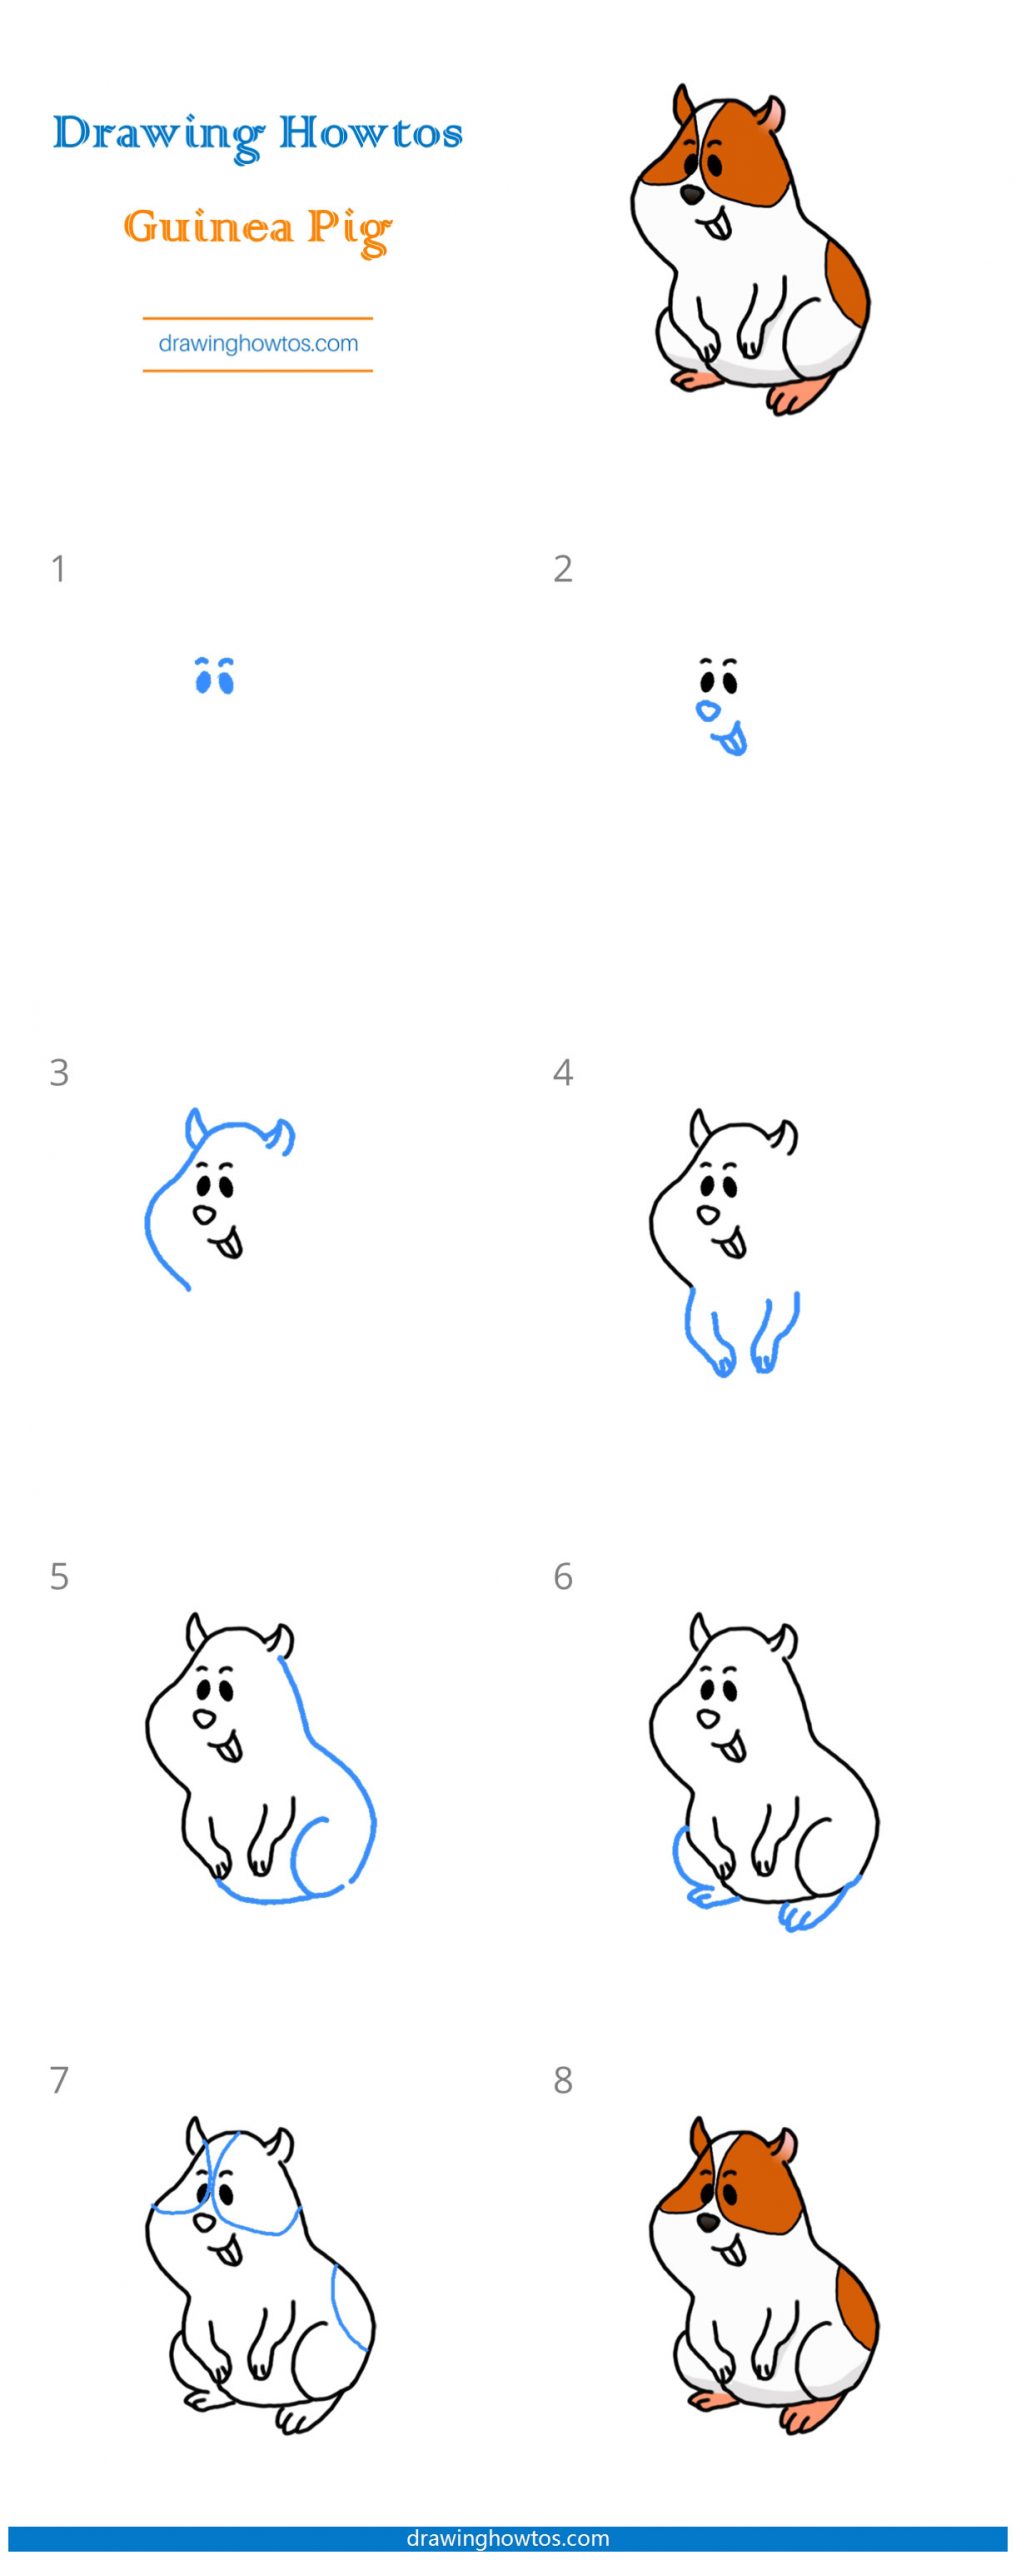 How to Draw a Guinea Pig Step by Step